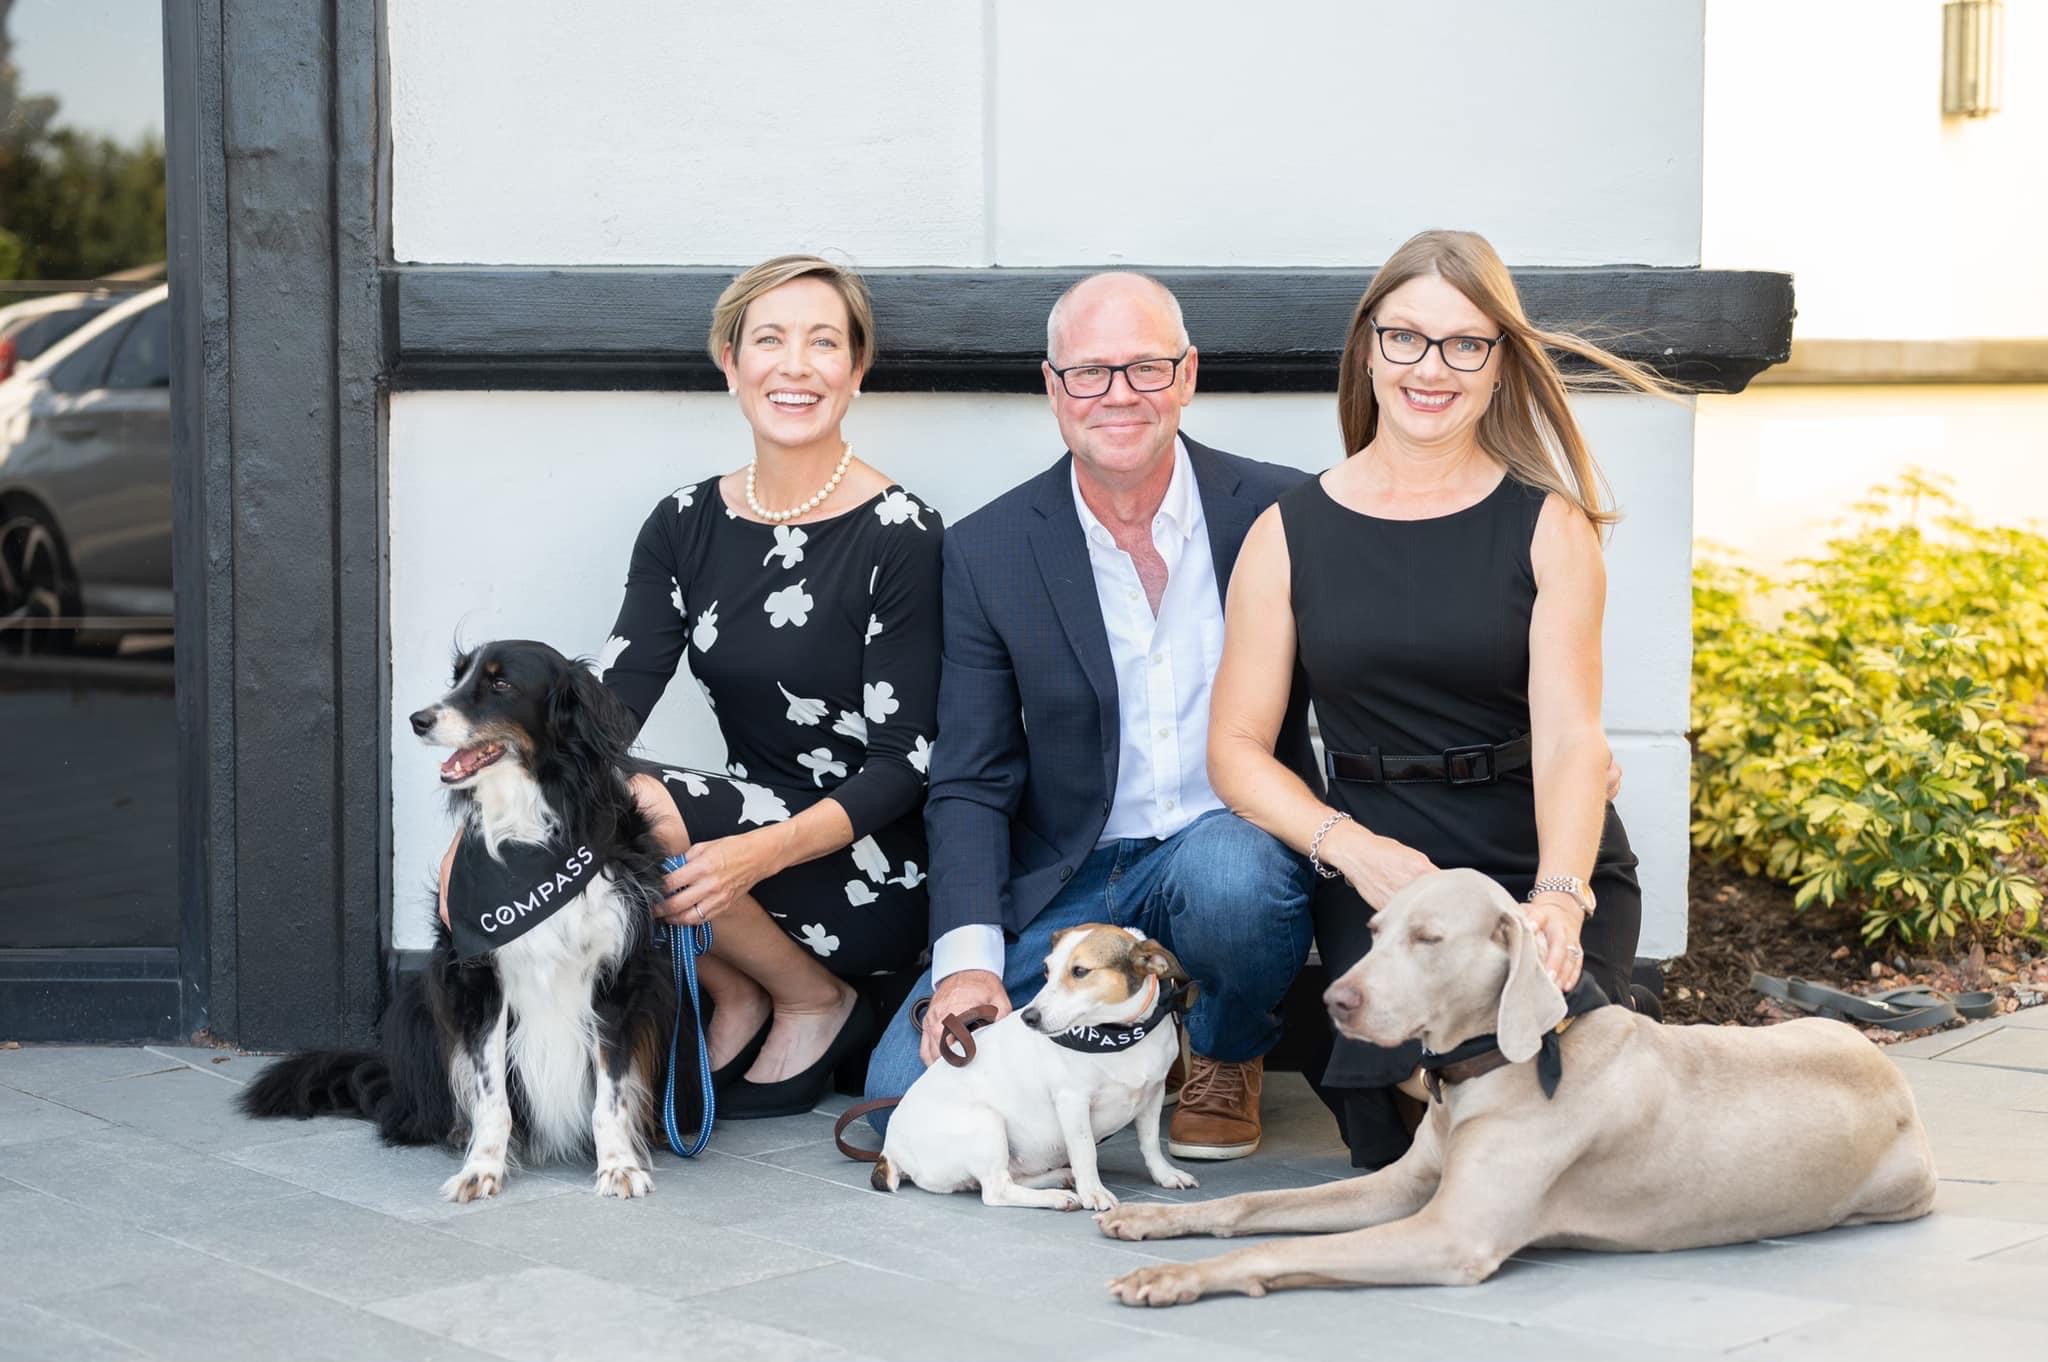 Gary, Lucinda and Meghan pictured with their dogs.